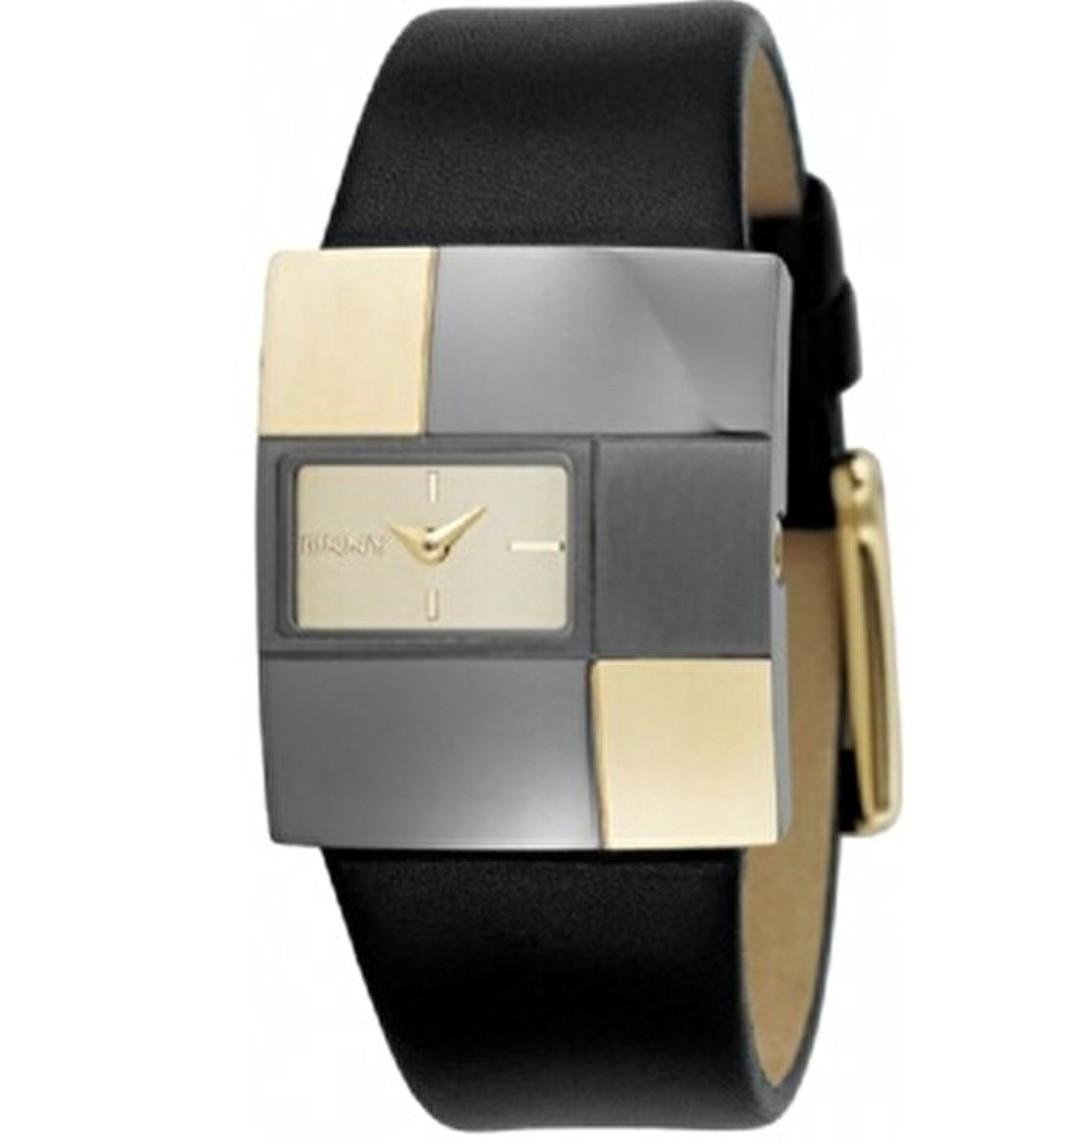 DKNY womens watch with special steel case with black platinum gold plating and black leather strap NY4454.